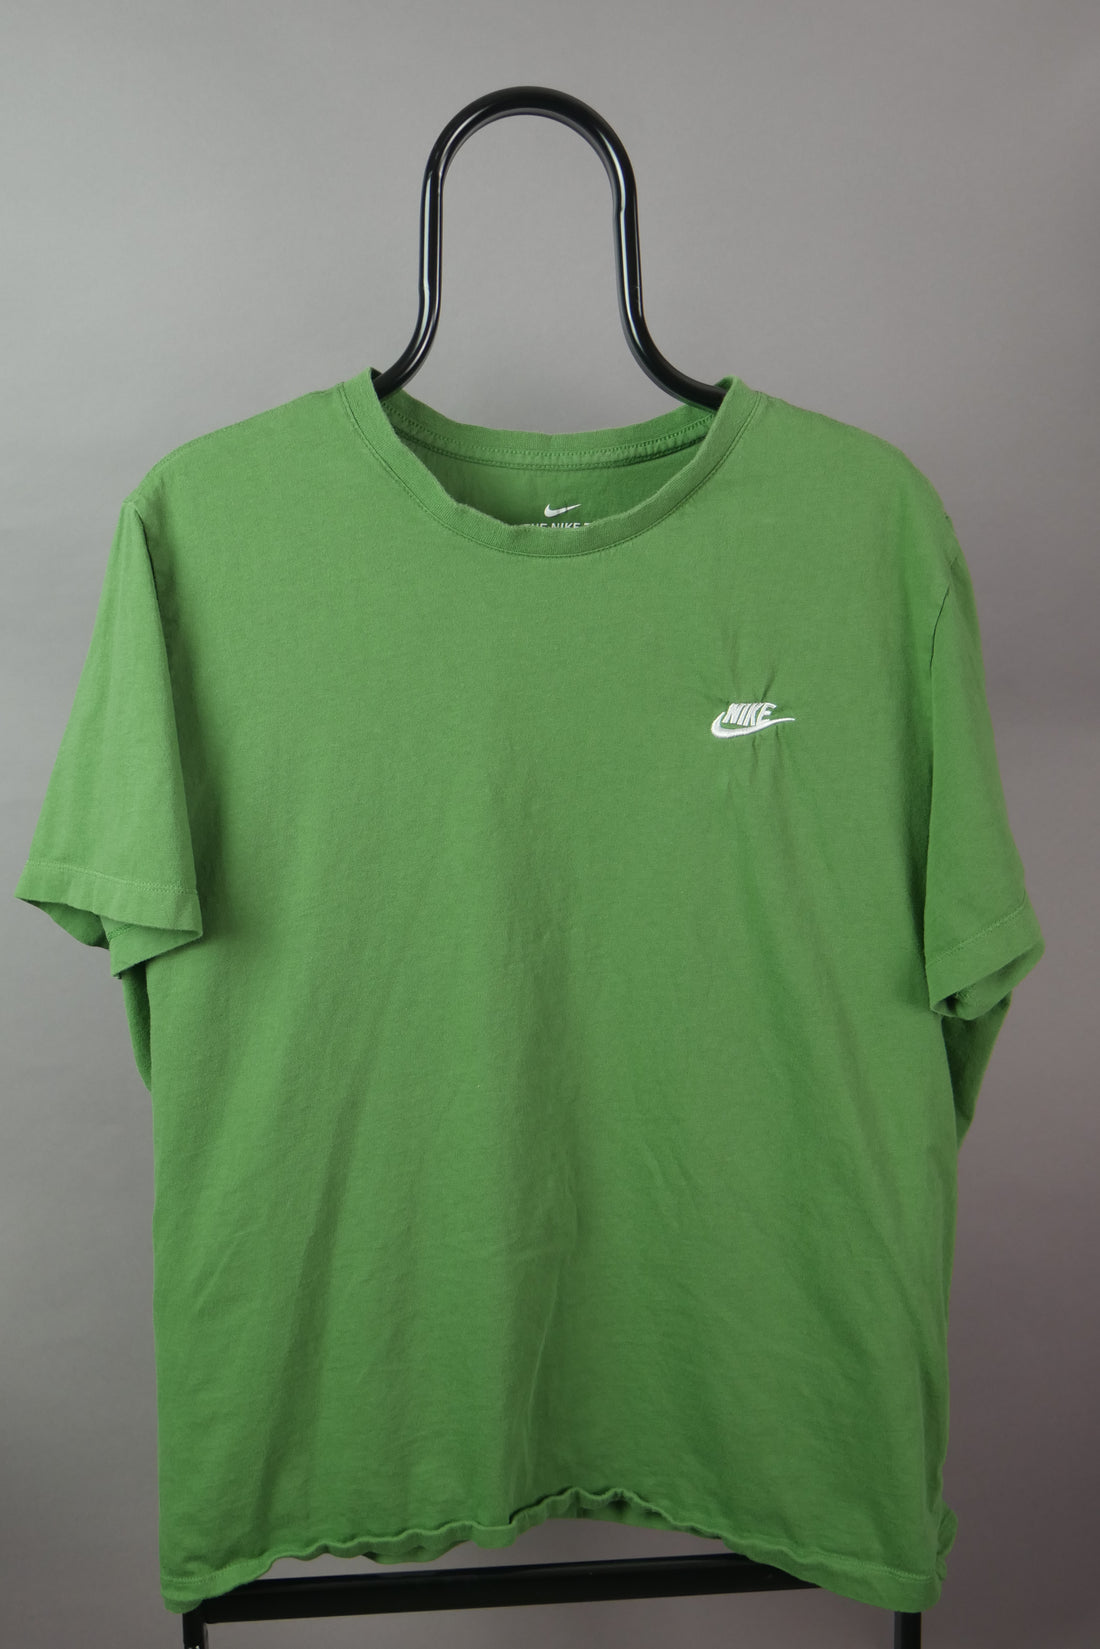 The Nike Embroidered Logo T-Shirt (XL)